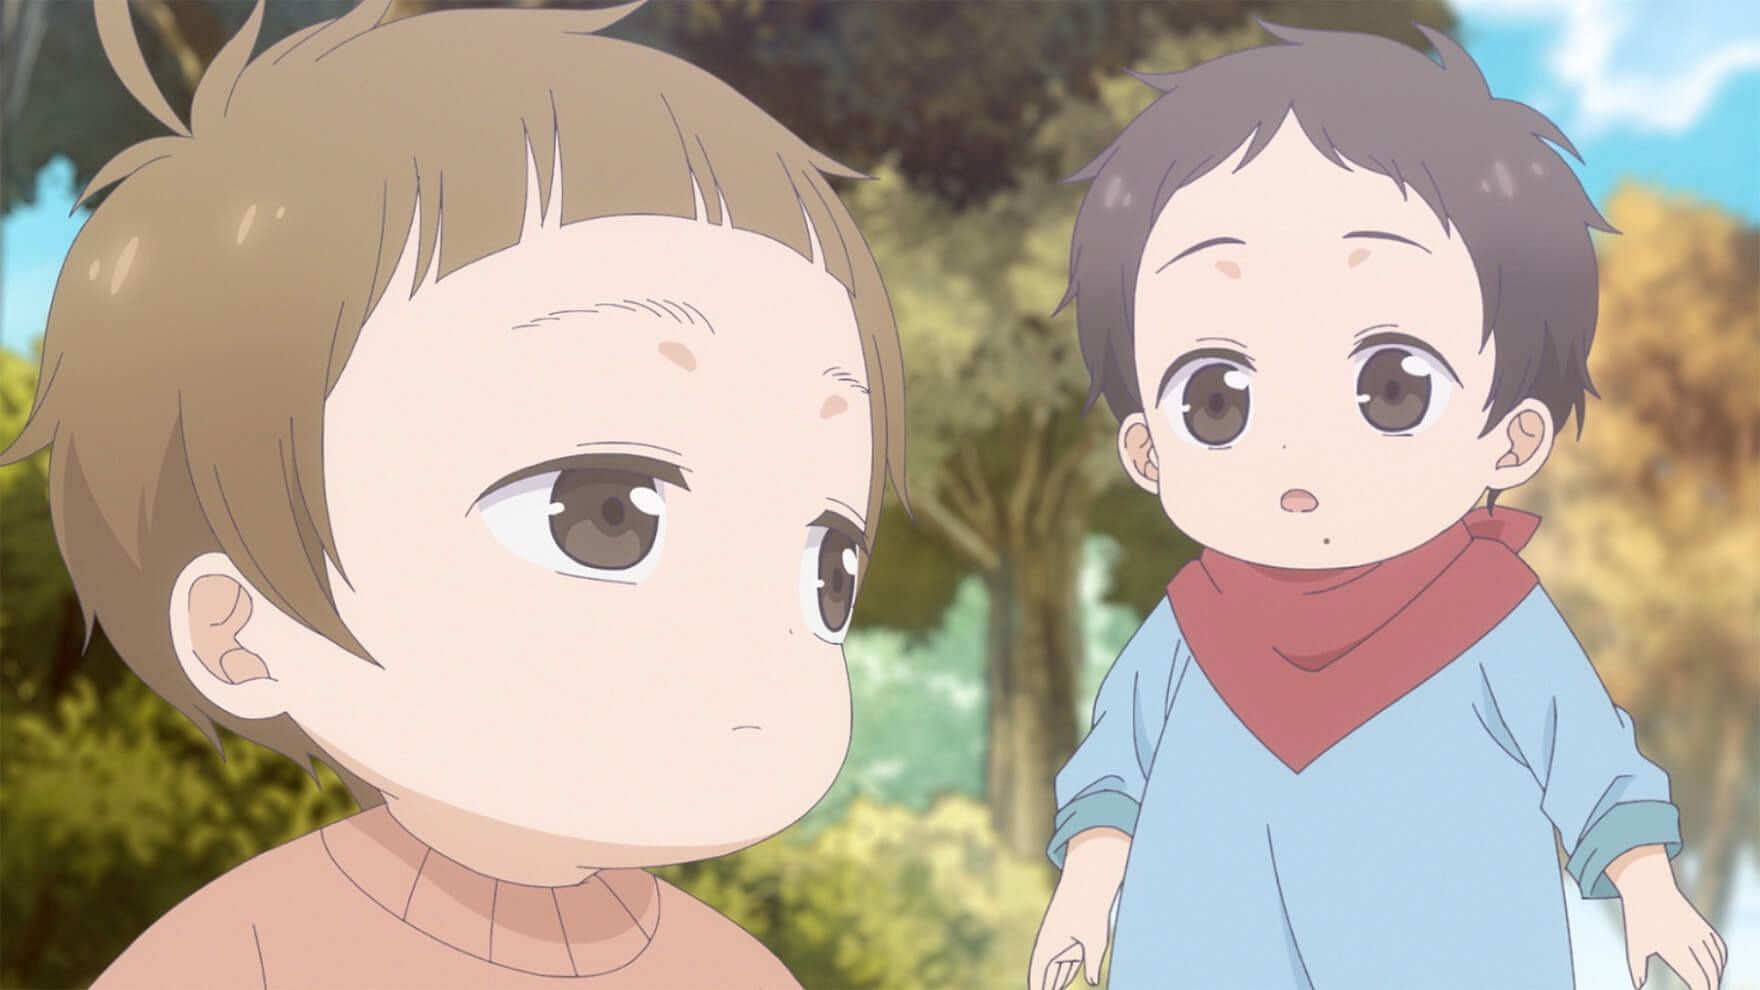 Tadaima, Okaeri episode 9: Release date and time, where to watch, and more